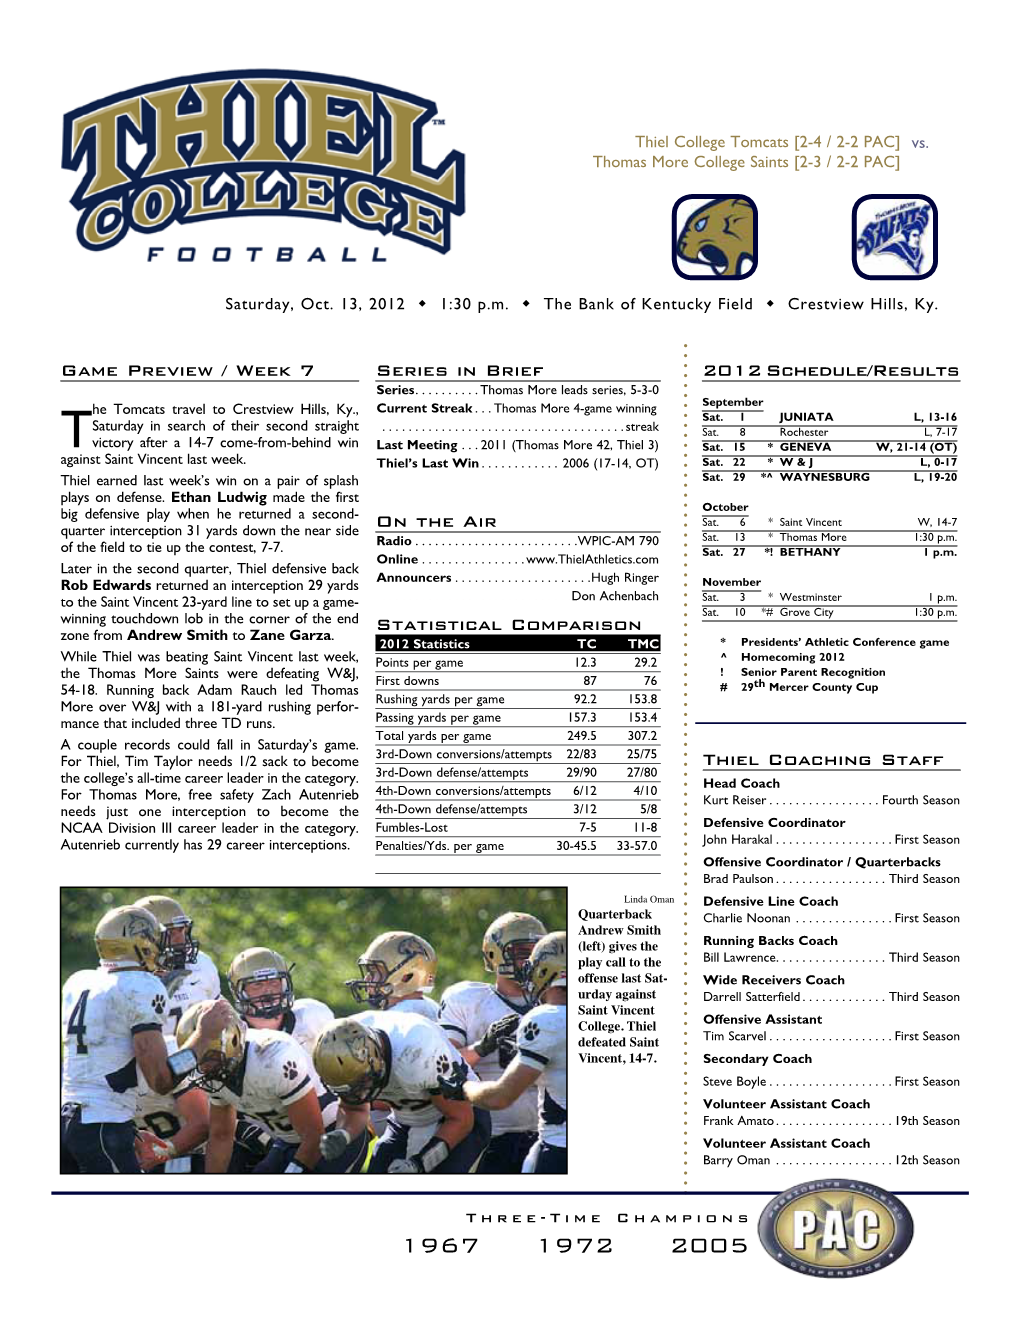 Game Preview / Week 7 Statistical Comparison Series in Brief on the Air 2012 Schedule/Results Thiel Coaching Staff